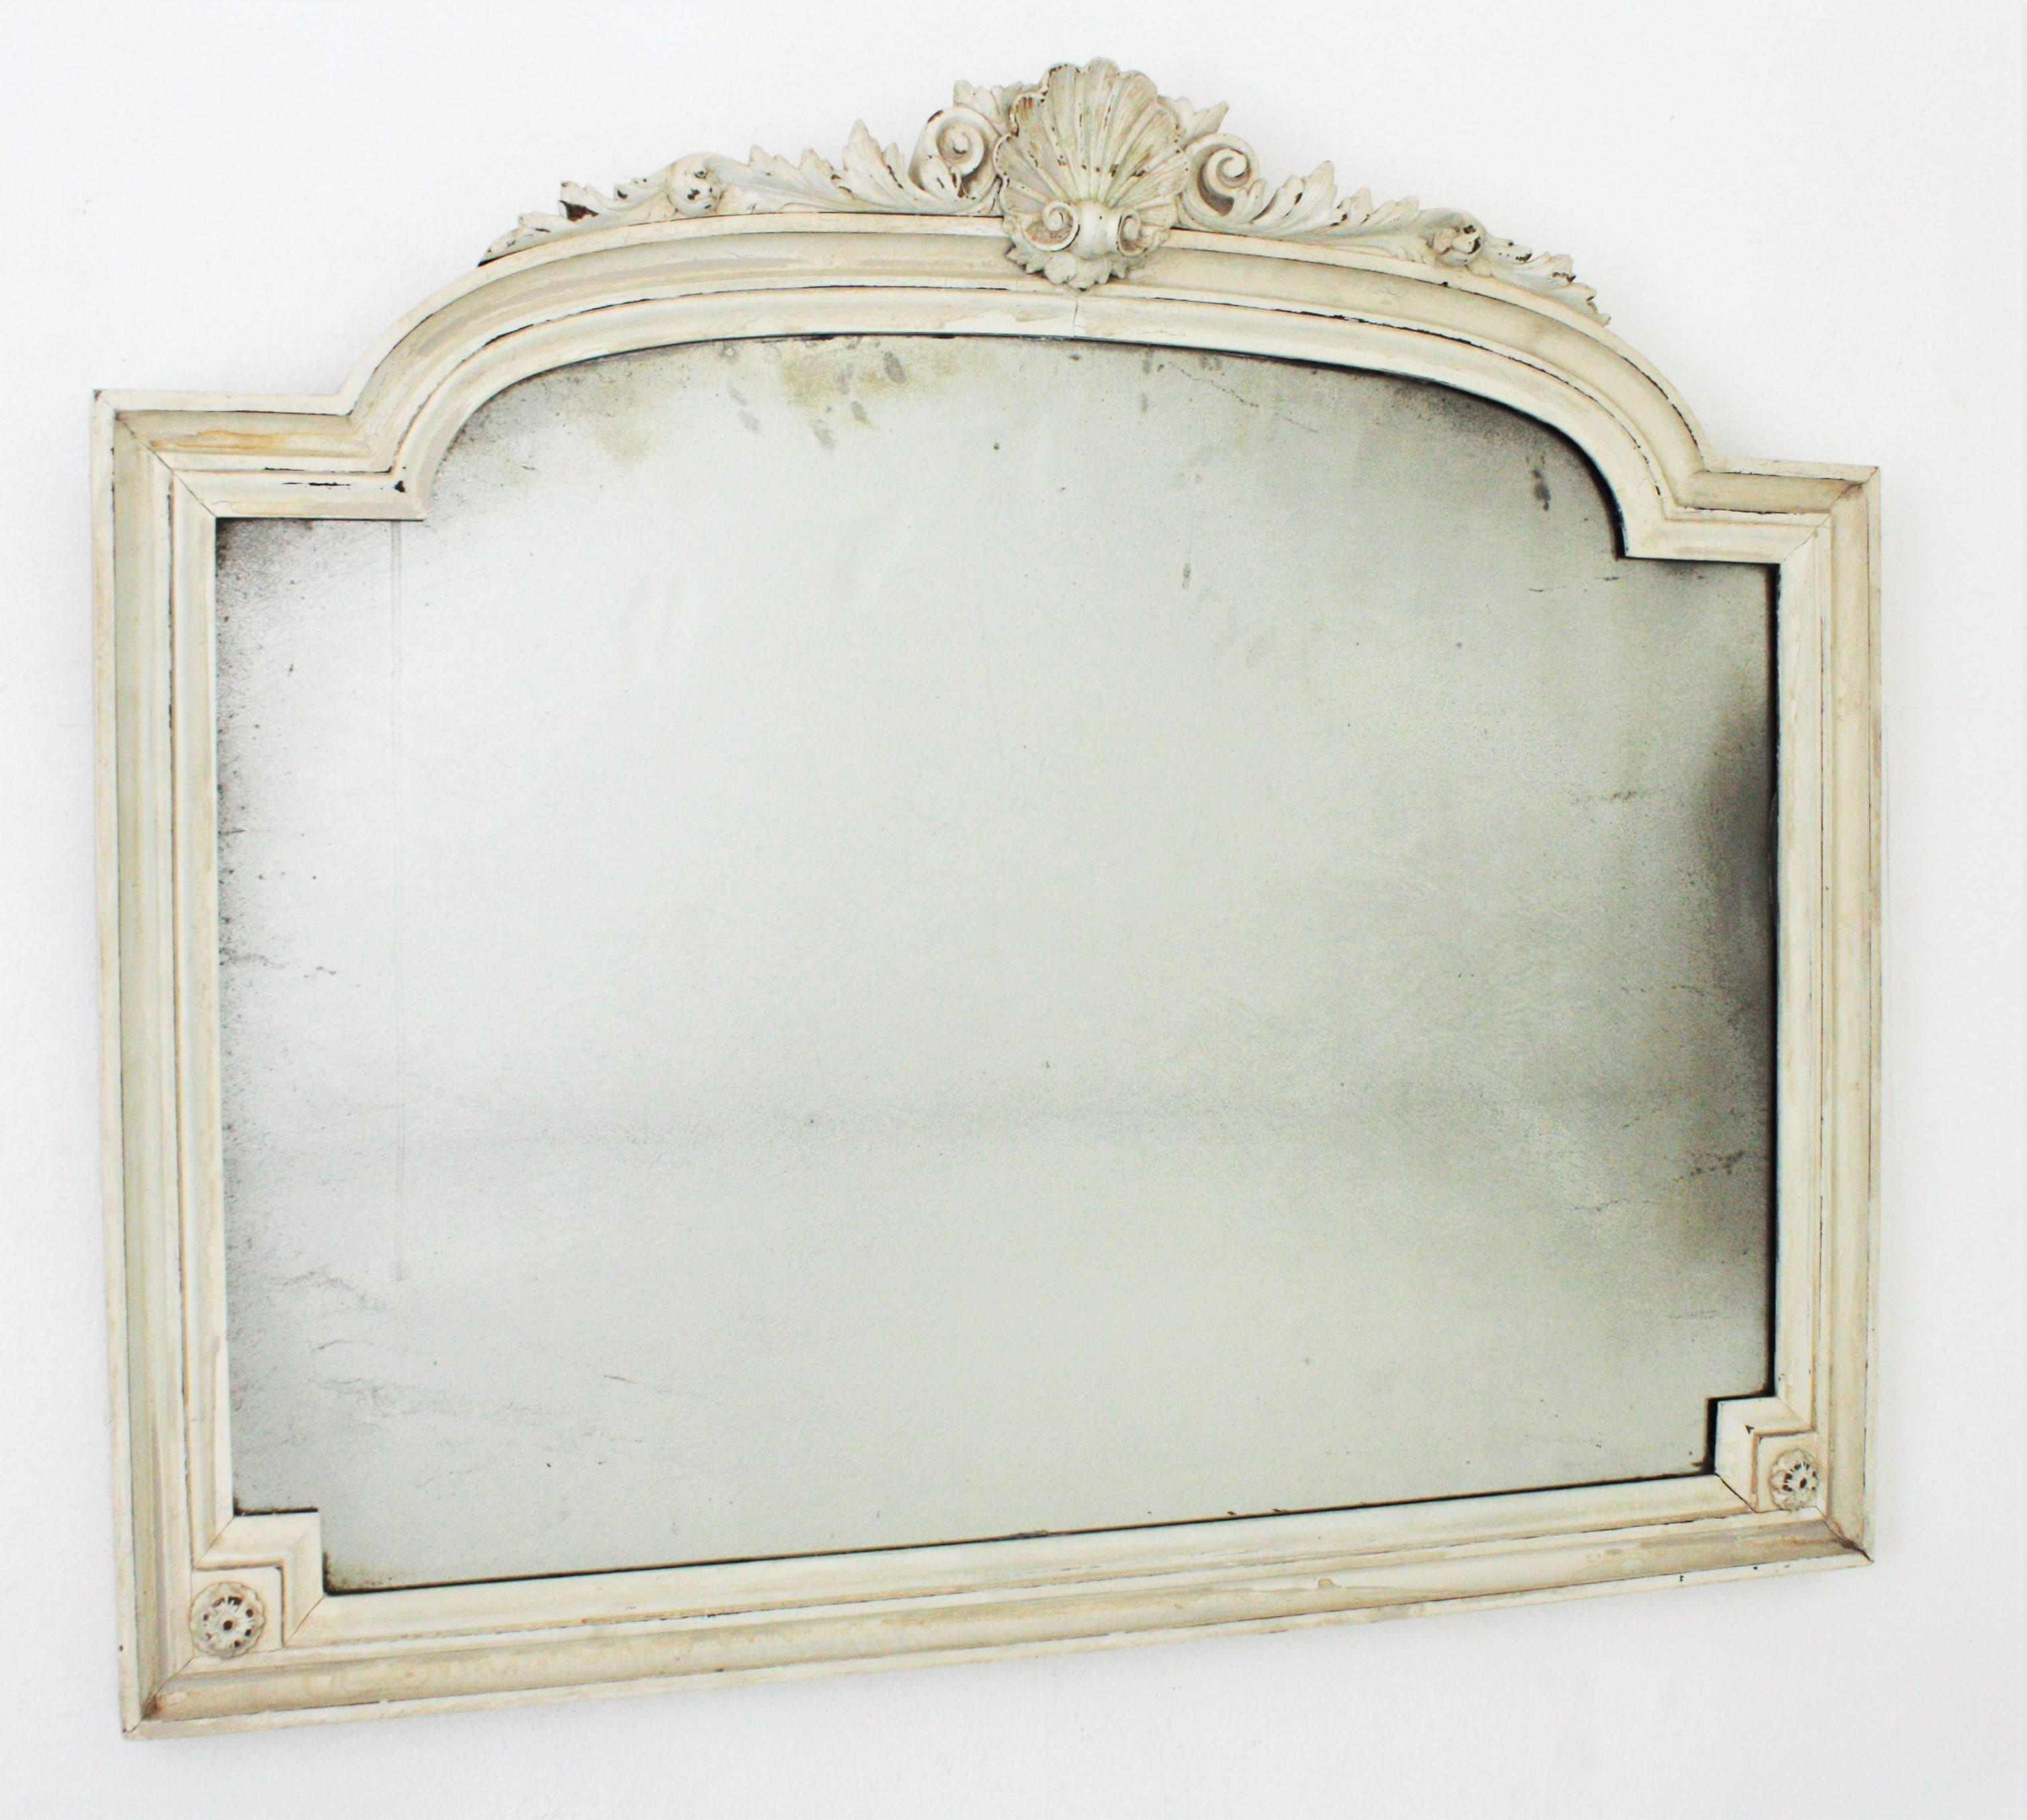 Beautiful arched provençal console mirror with clam shell, floral ornamentations and white patina. France, 1920s.
The carved wood frame is painted in white with accents in ivory and brown color. It wears its original antique glass that show an aged